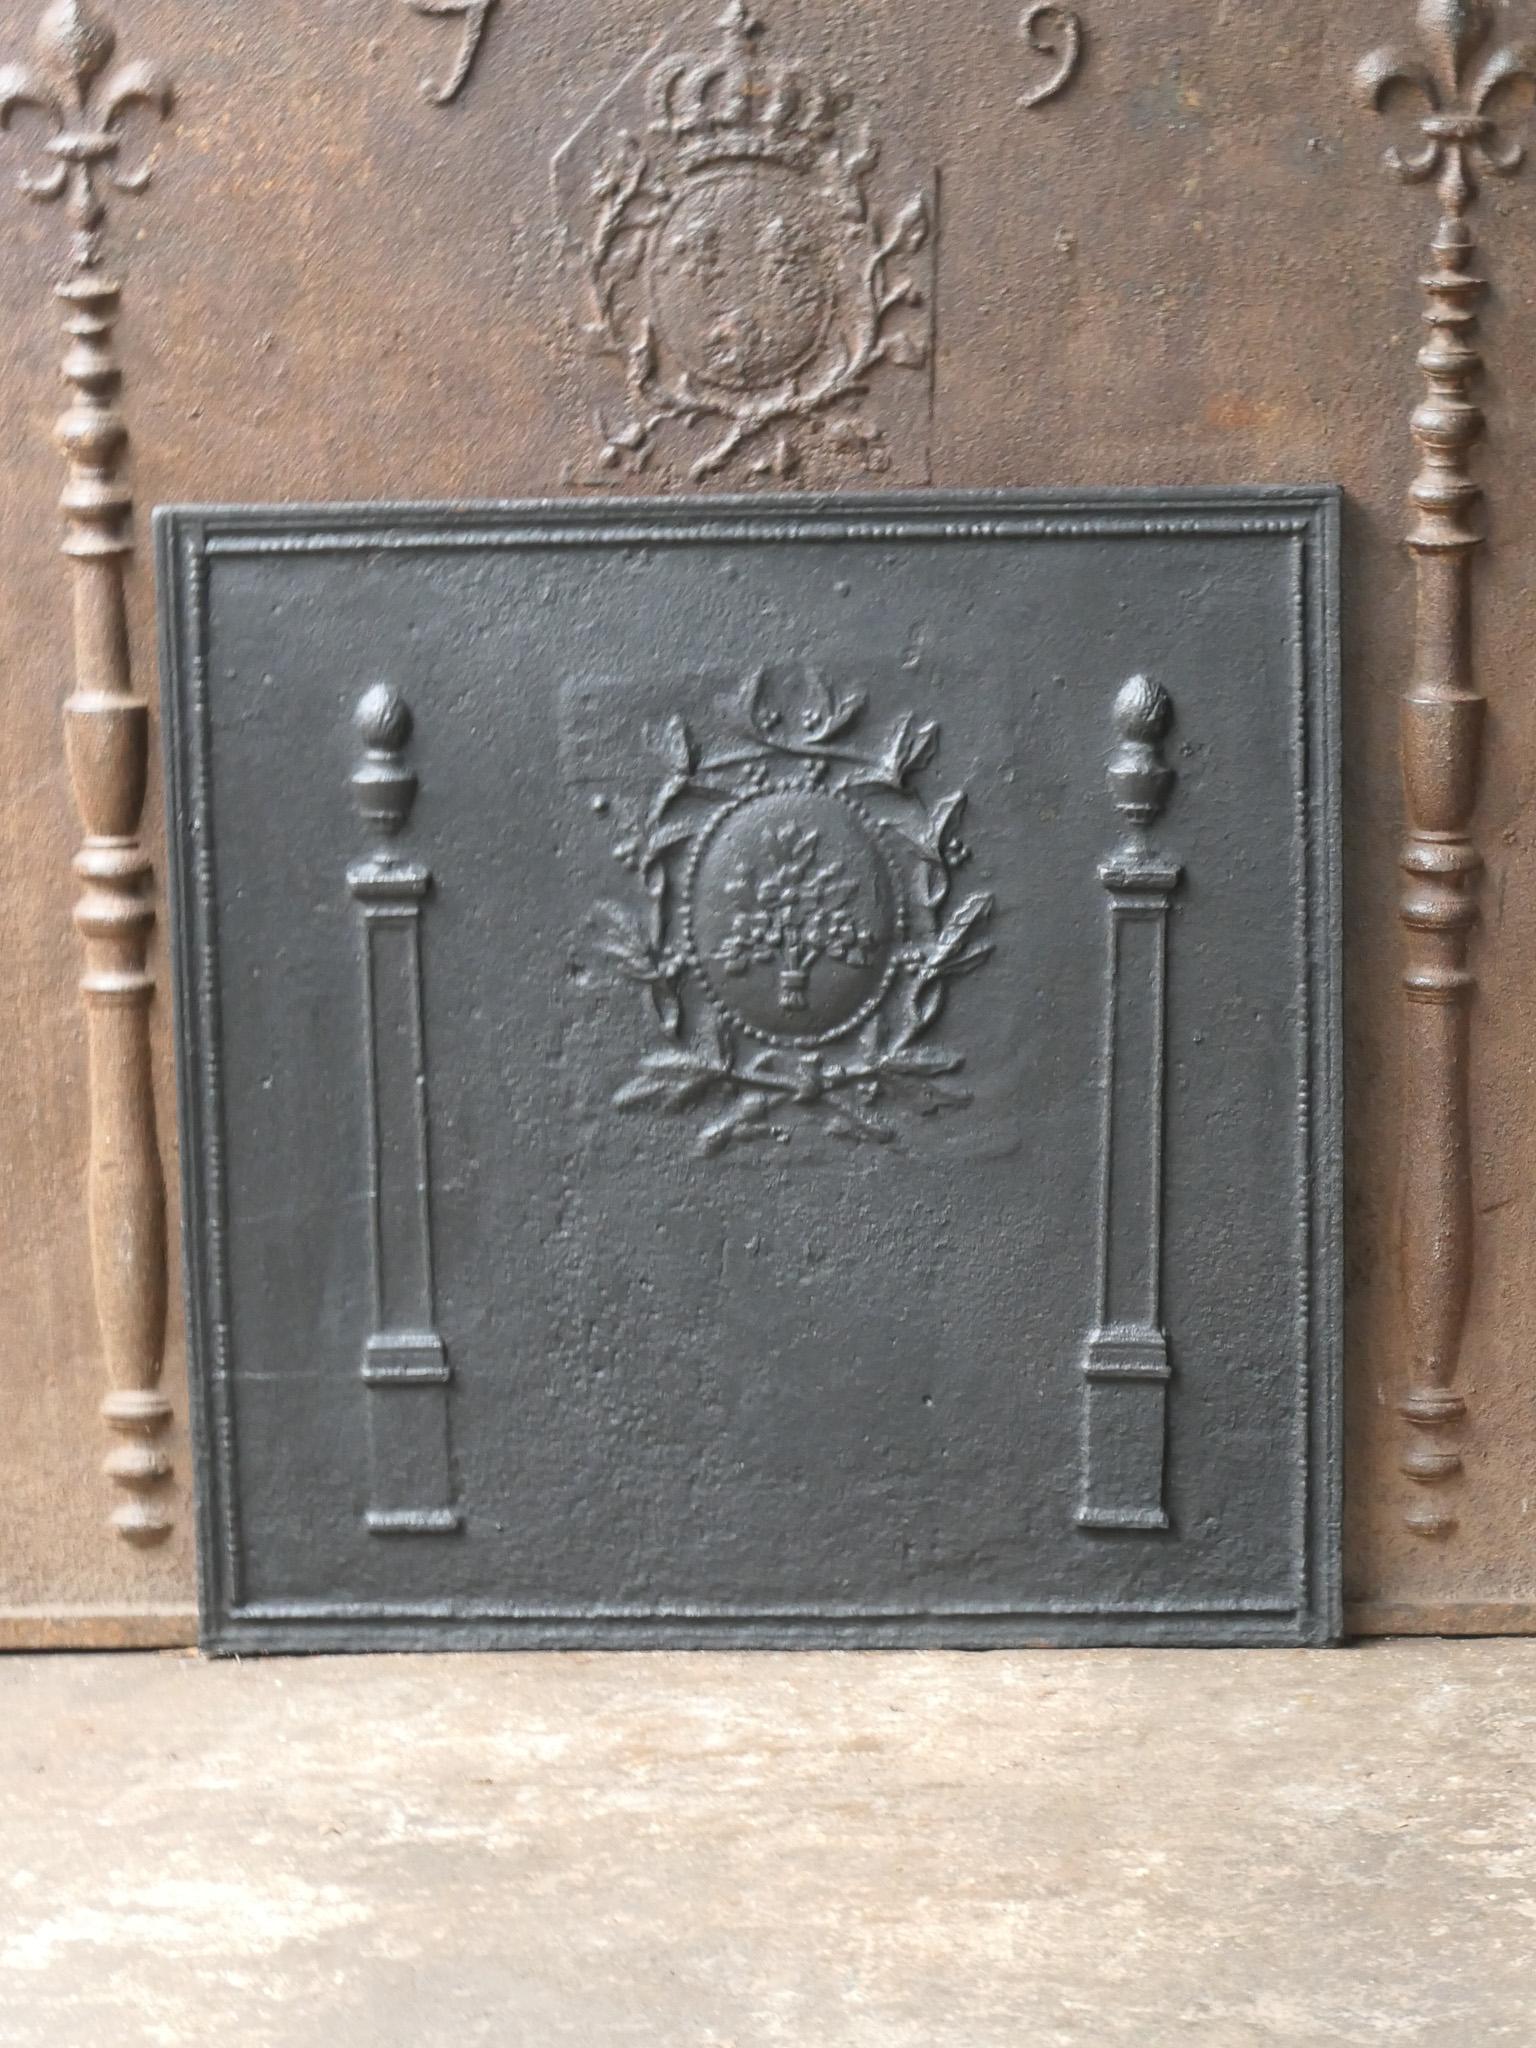 Beautiful 18th/19th century French Neoclassical fireback with flower decorations and two pillars. The pillars refer to the club of Hercules and Stand for strength and the unknown. Towards the end of the 18th century and the start of the Louis XV